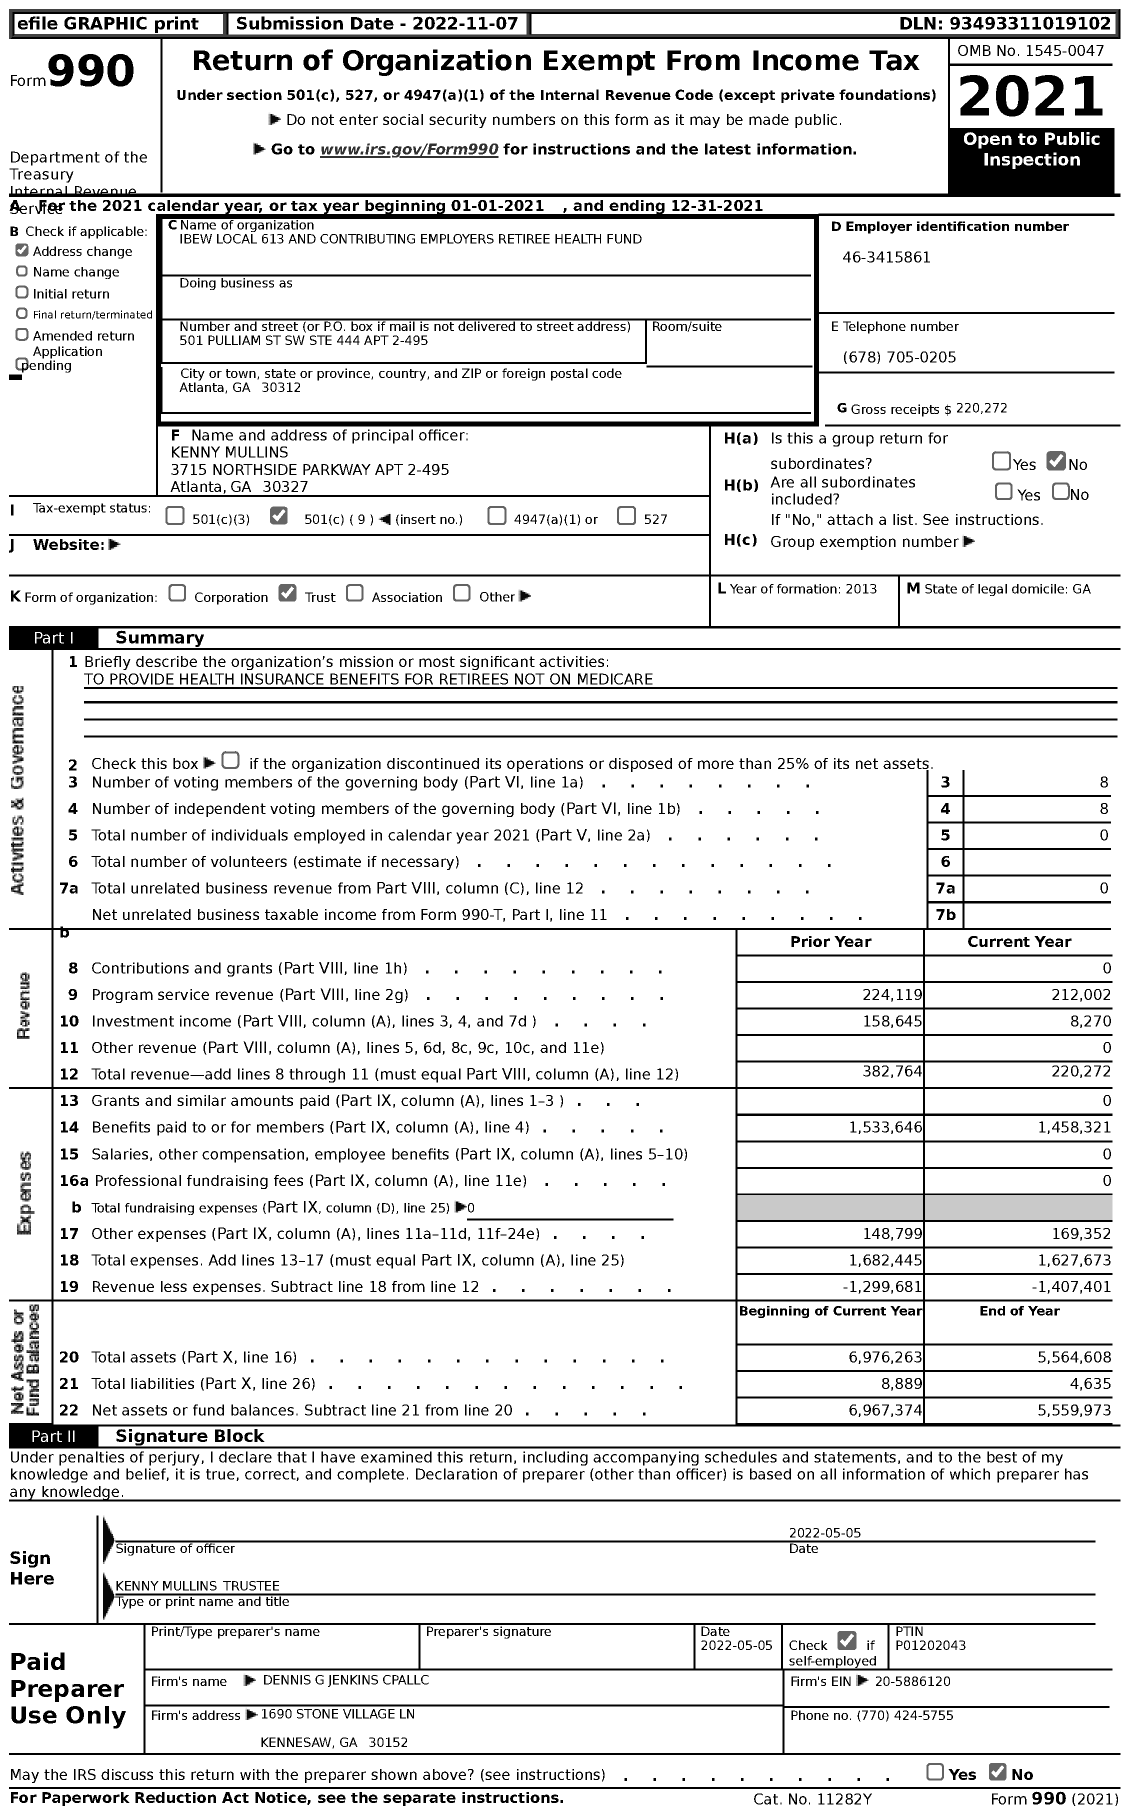 Image of first page of 2021 Form 990 for IBEW Local 613 and Contributing Employers Retiree Health Fund